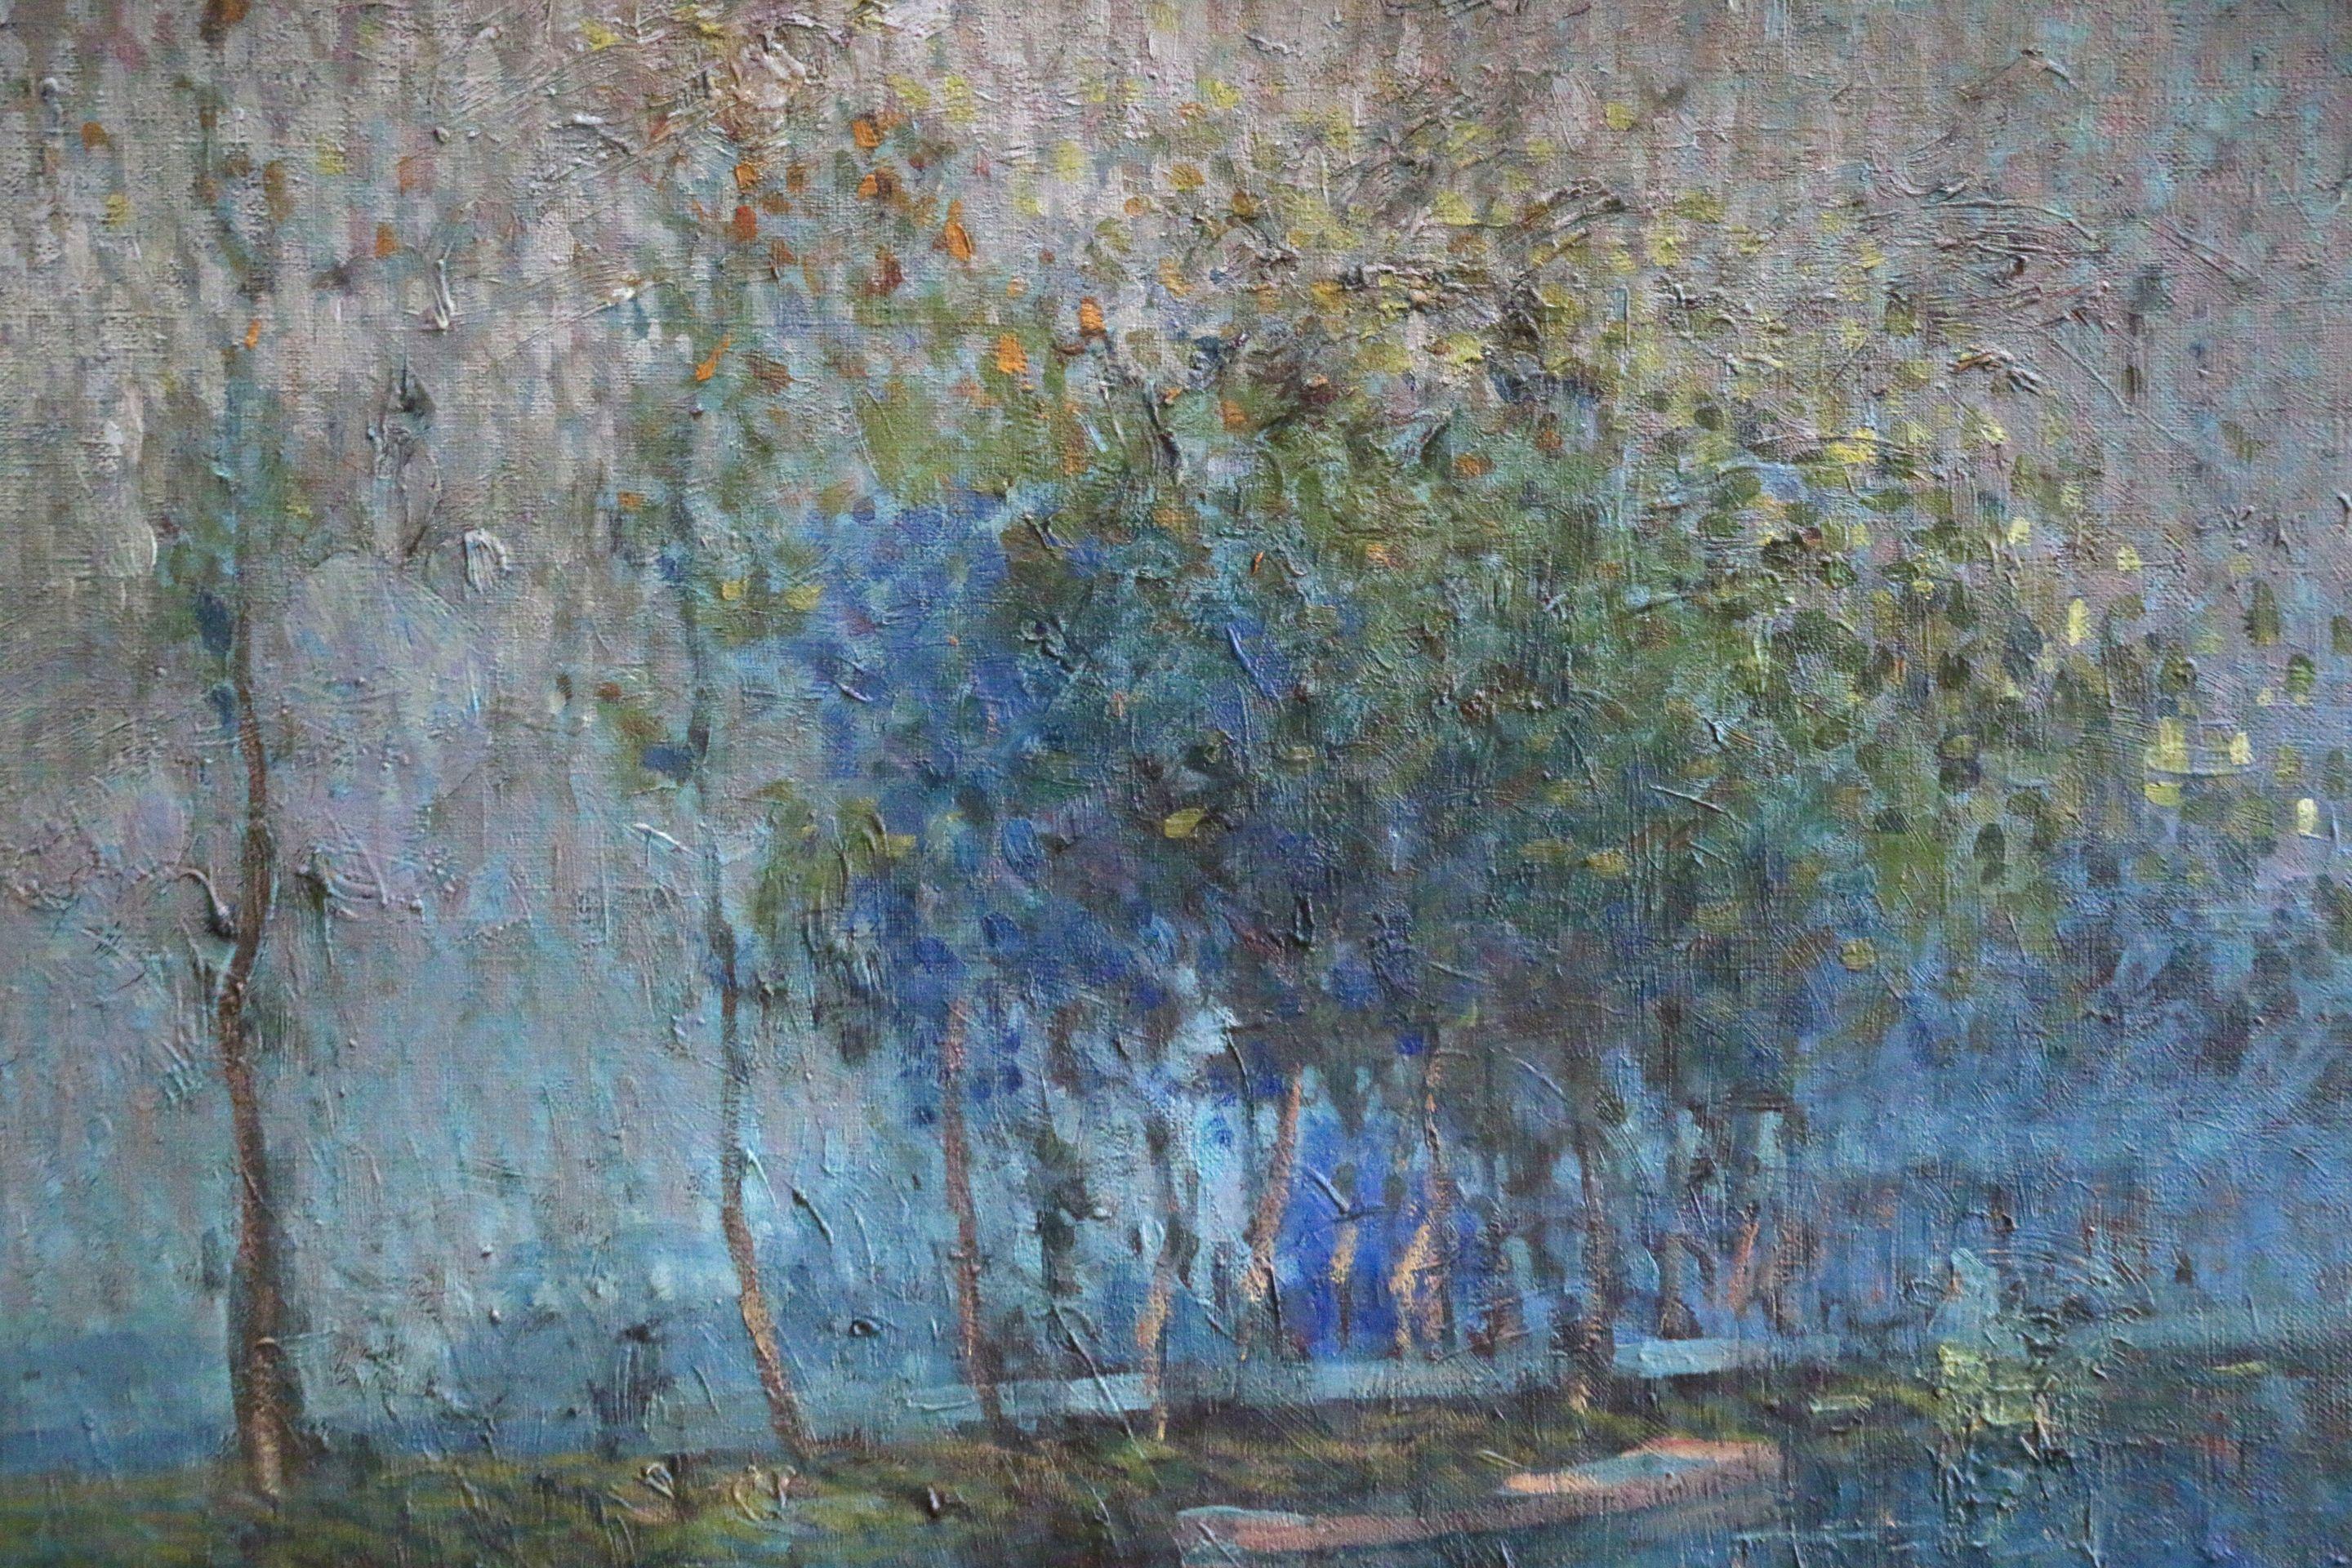 On the River - 19th Century Oil, Figures & Trees on Bank of River by Elie Pavil - Impressionist Painting by Elie Anatole Pavil